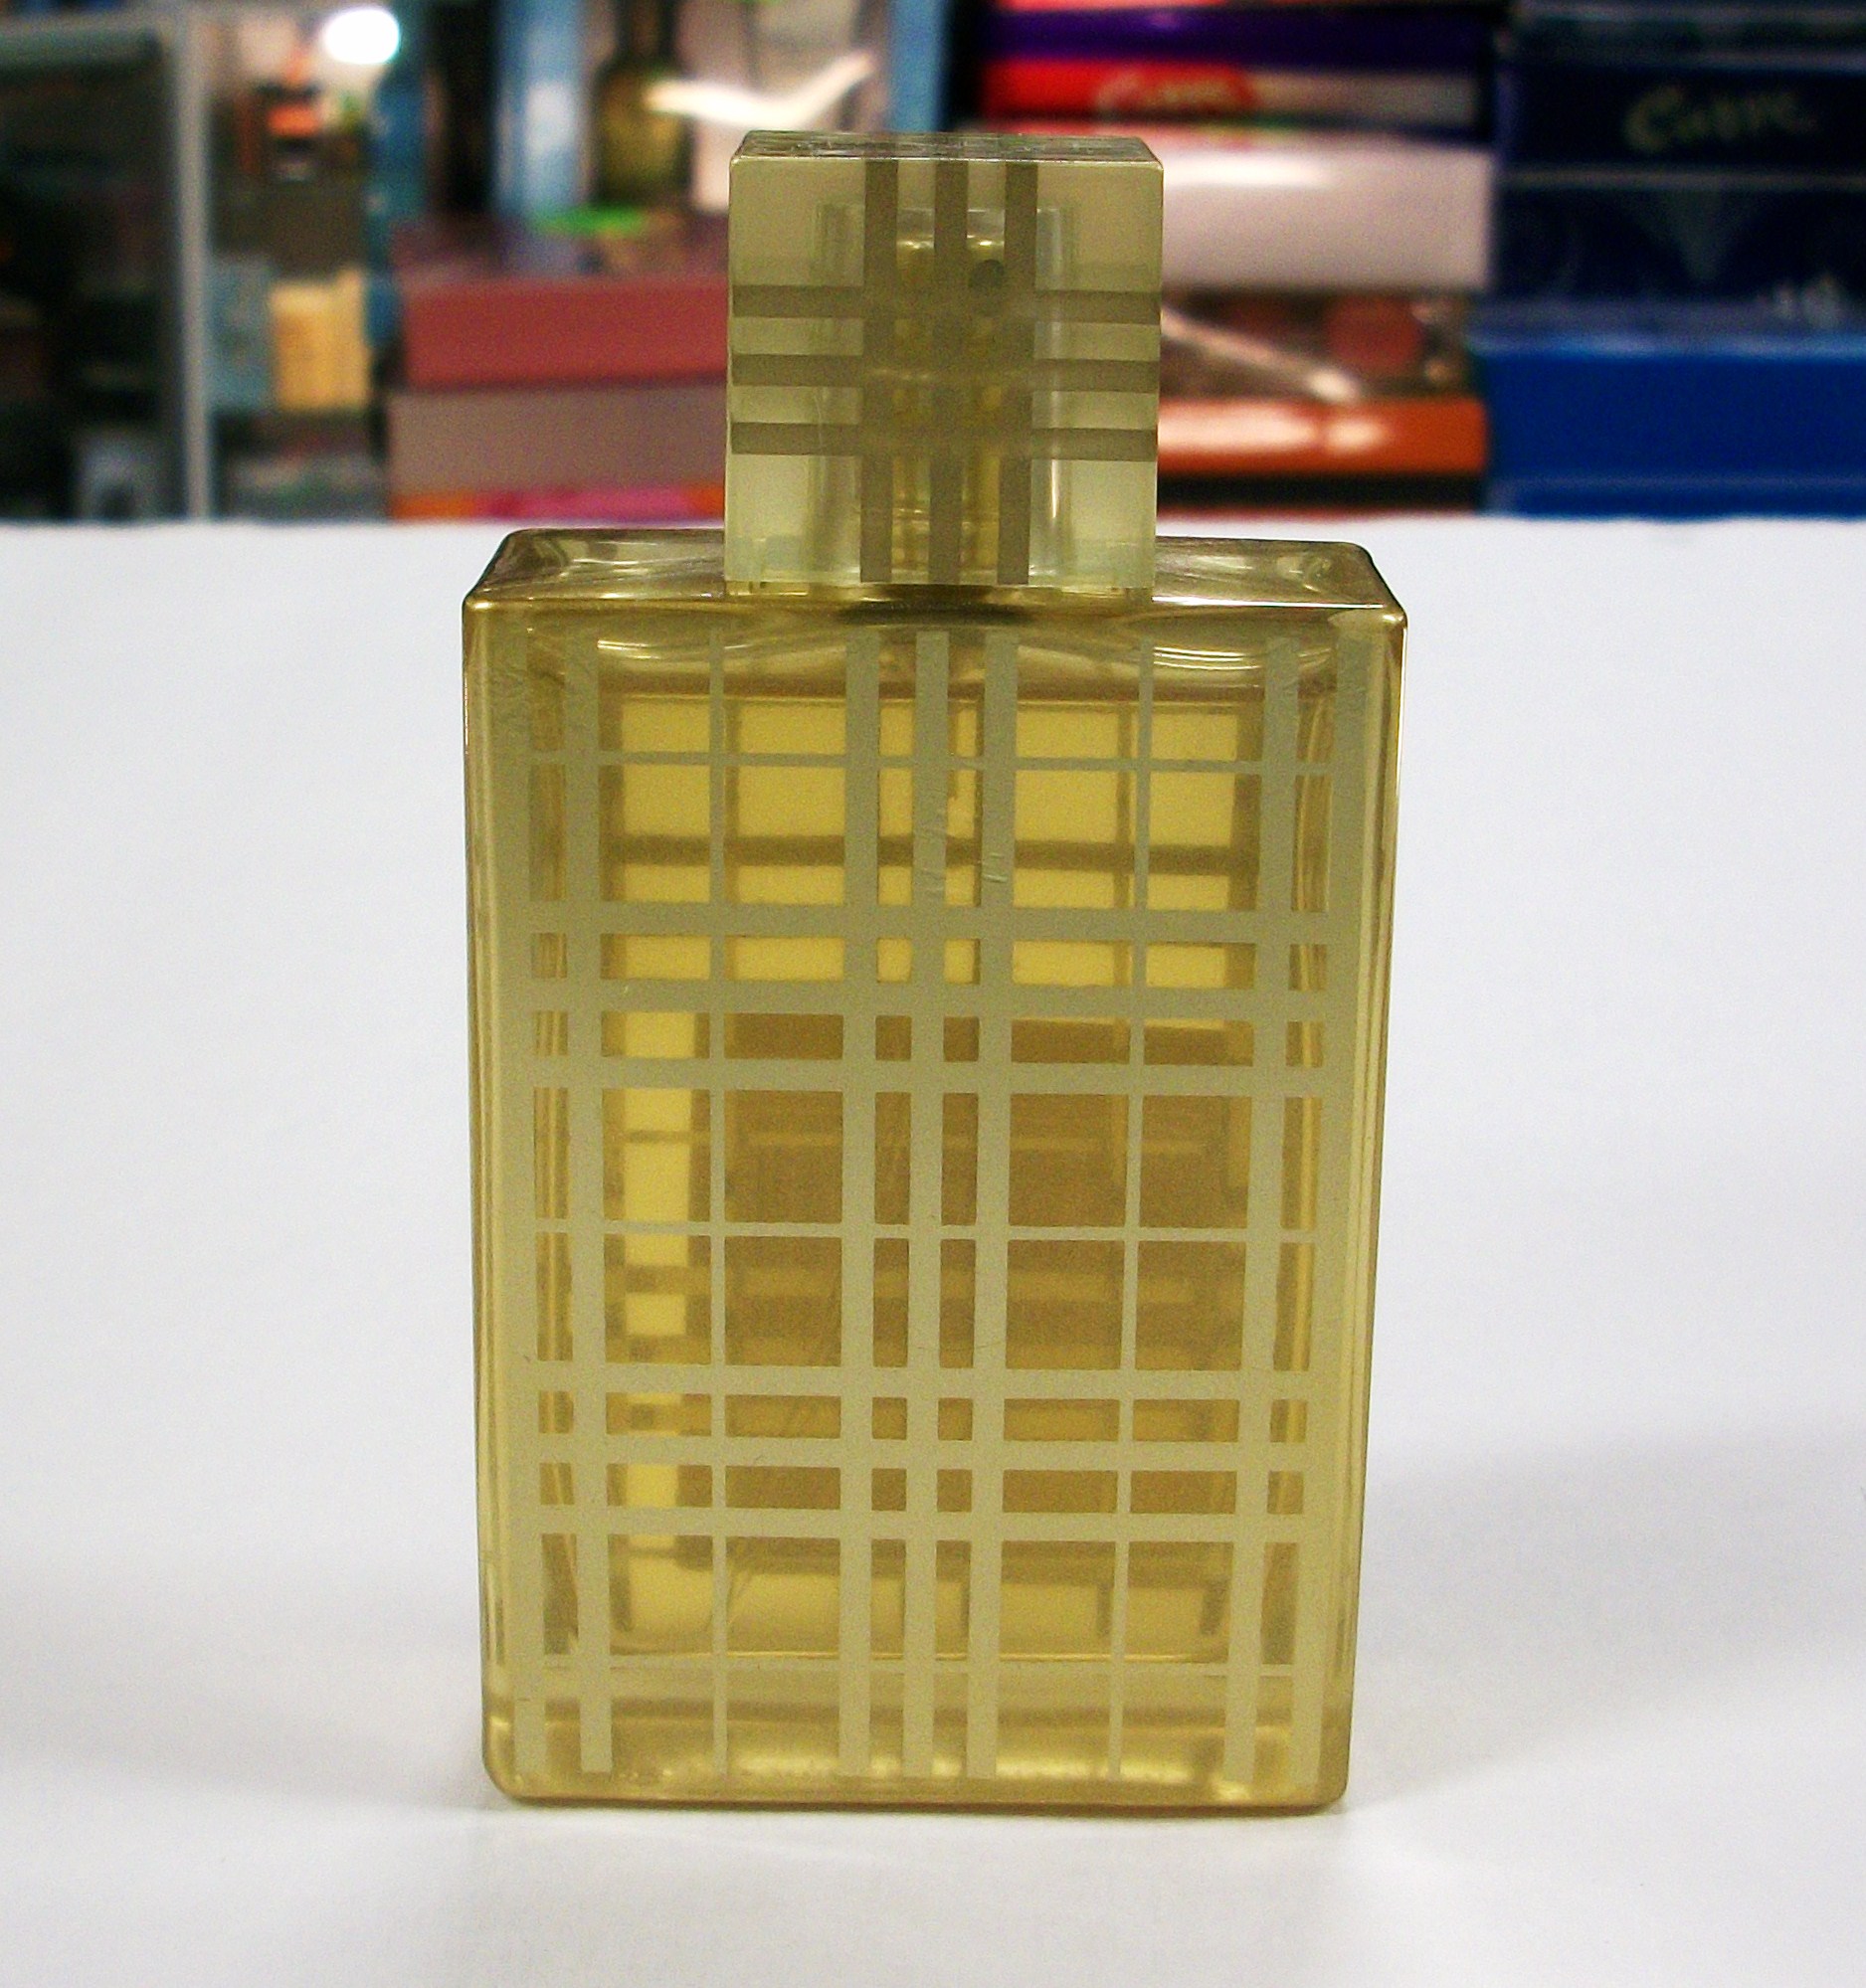 burberry brit gold limited edition 100ml